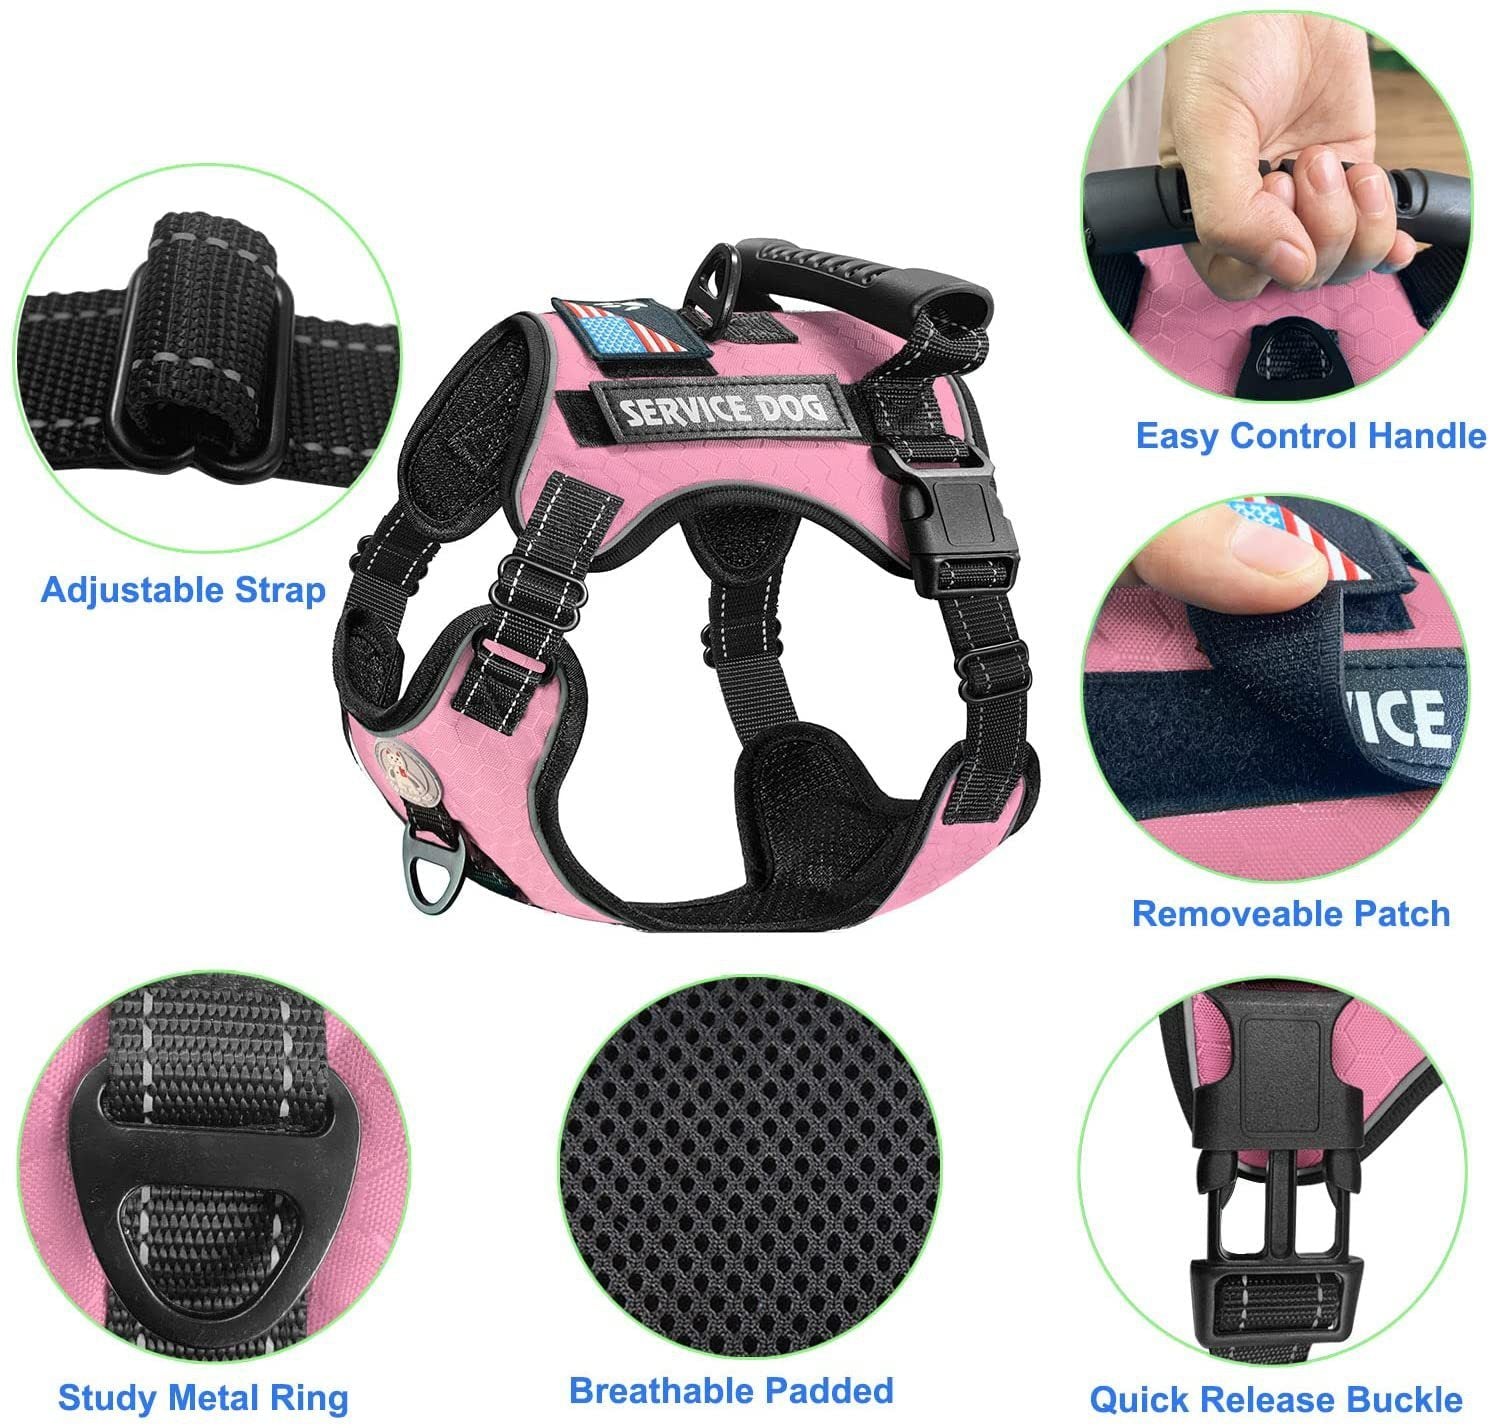 Pet Harness And Leash Set For small and large dogs & Cats; Adjustable No Pull Service Dog Vest Harness For Walking. Raee Industries